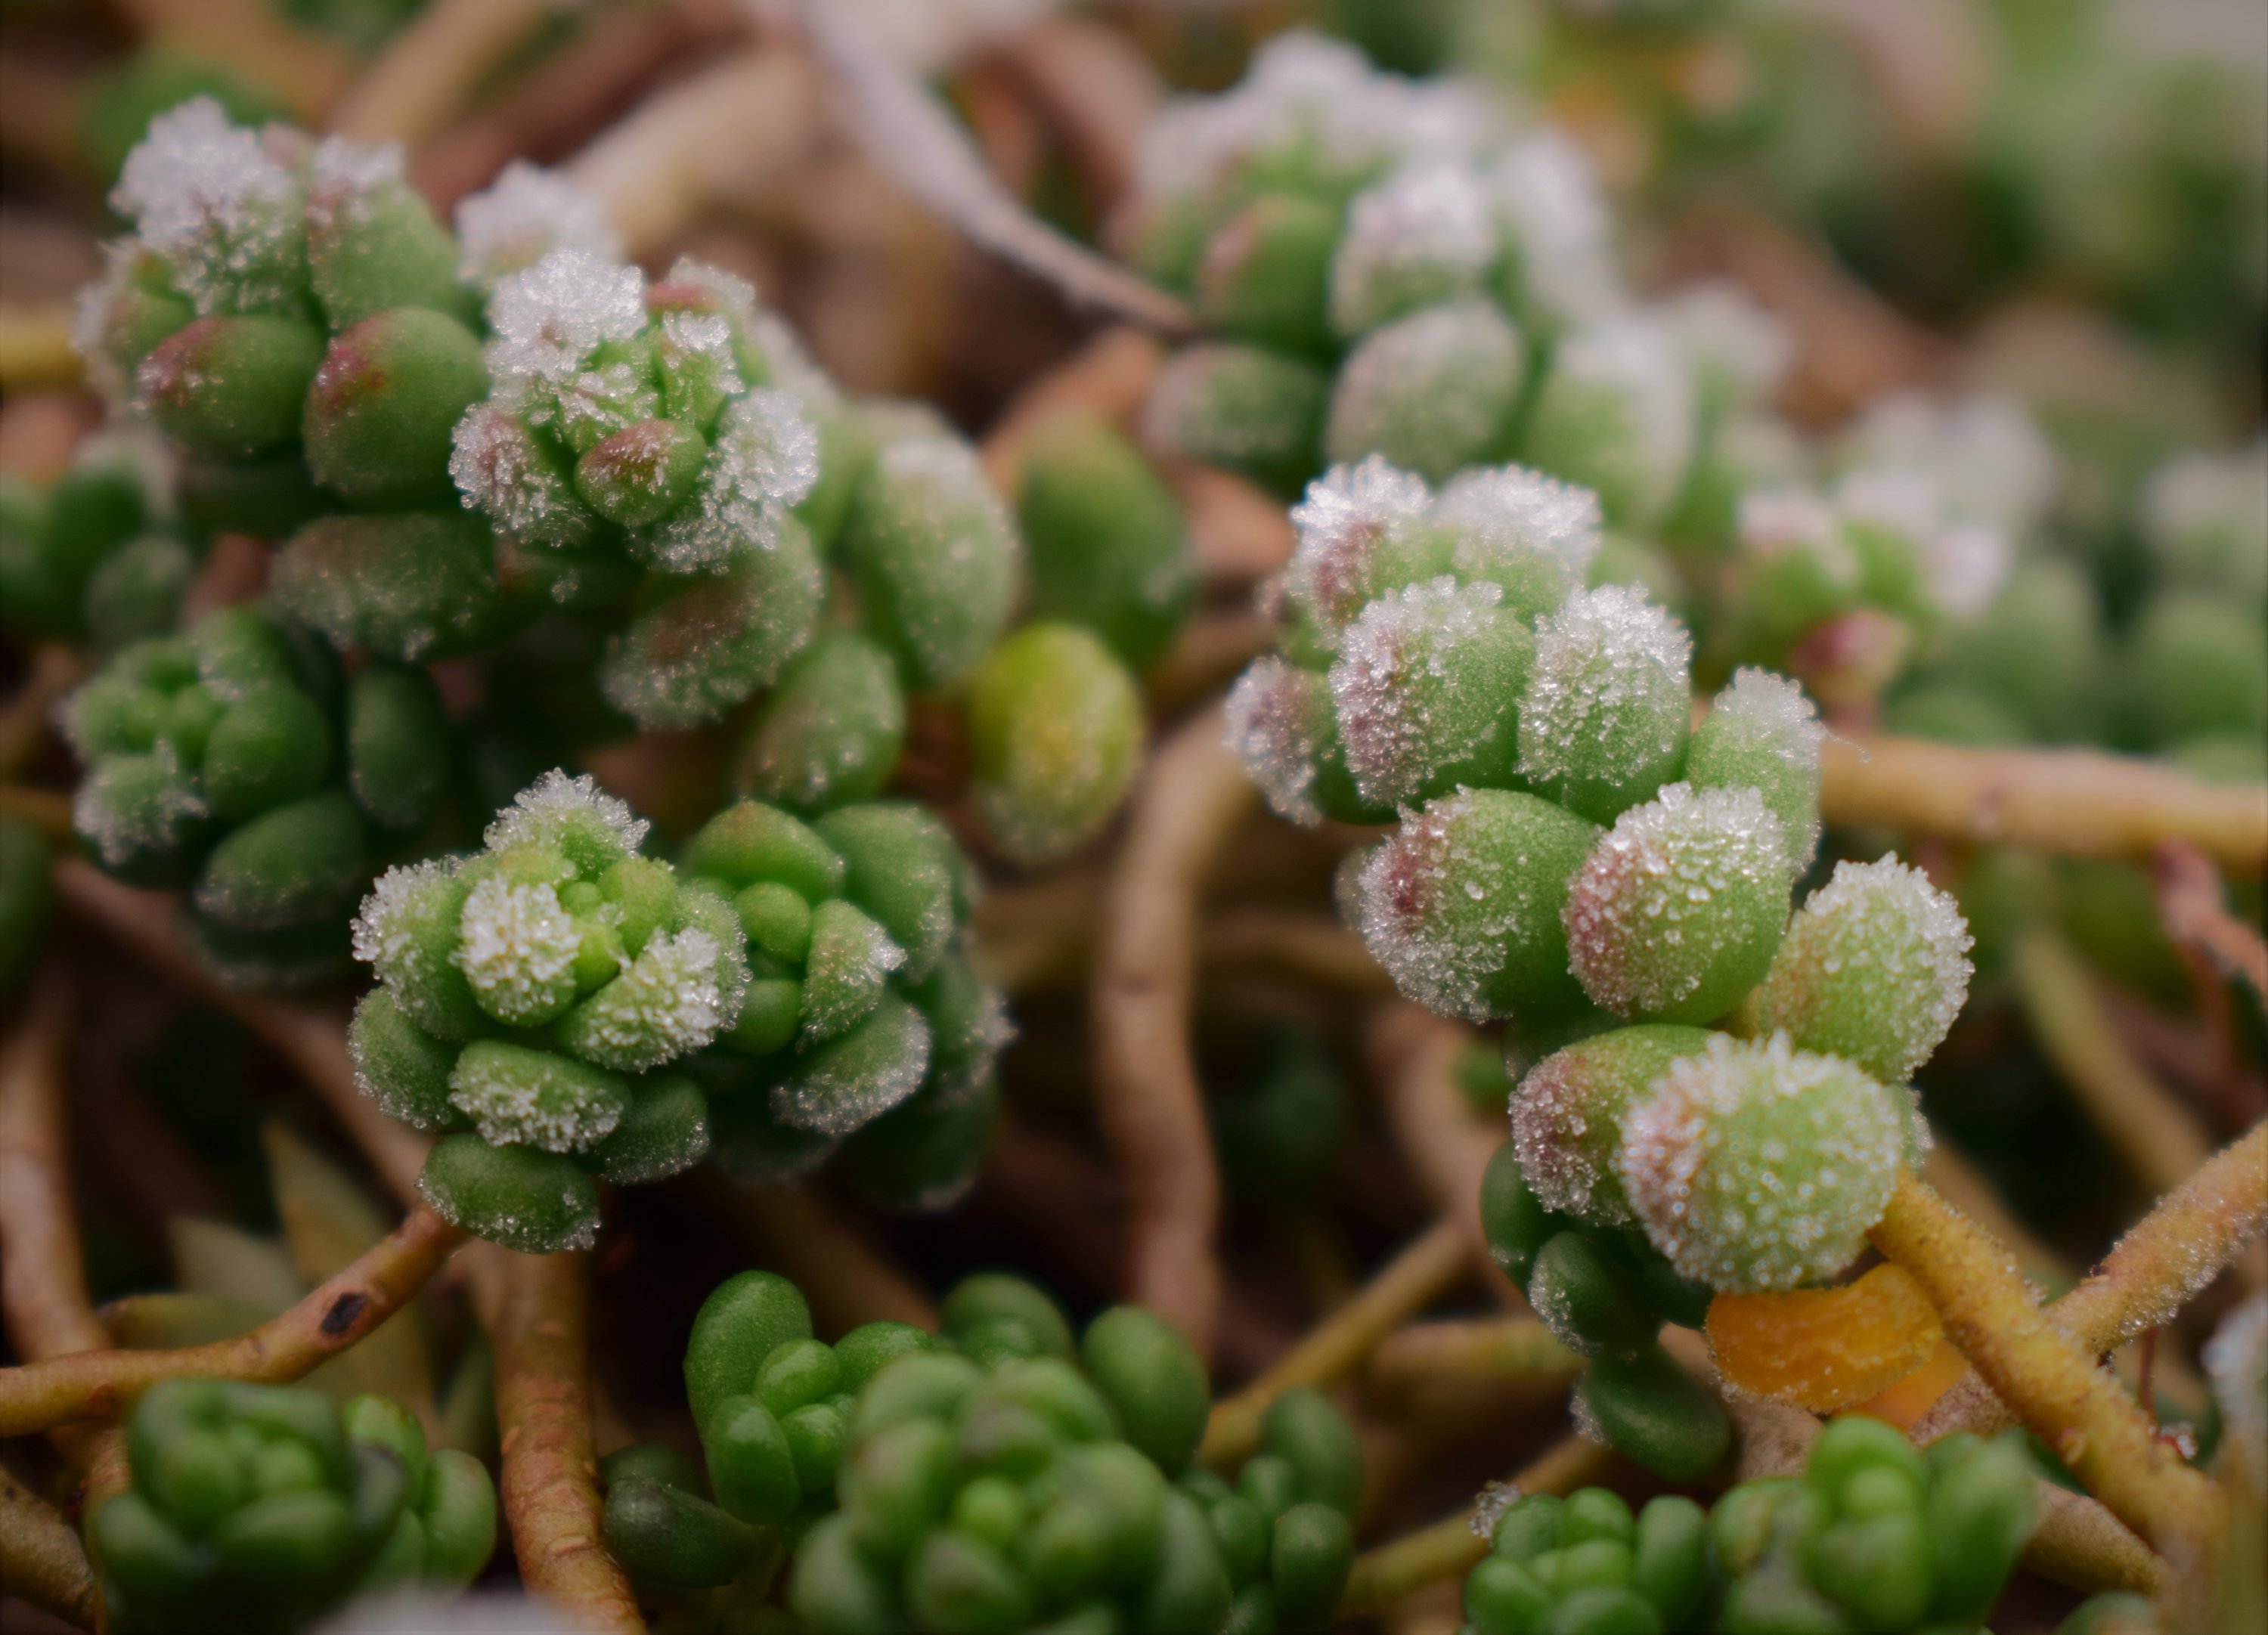 Subzero temperatures could spell death for your succulents. (Shutterstock Photo)